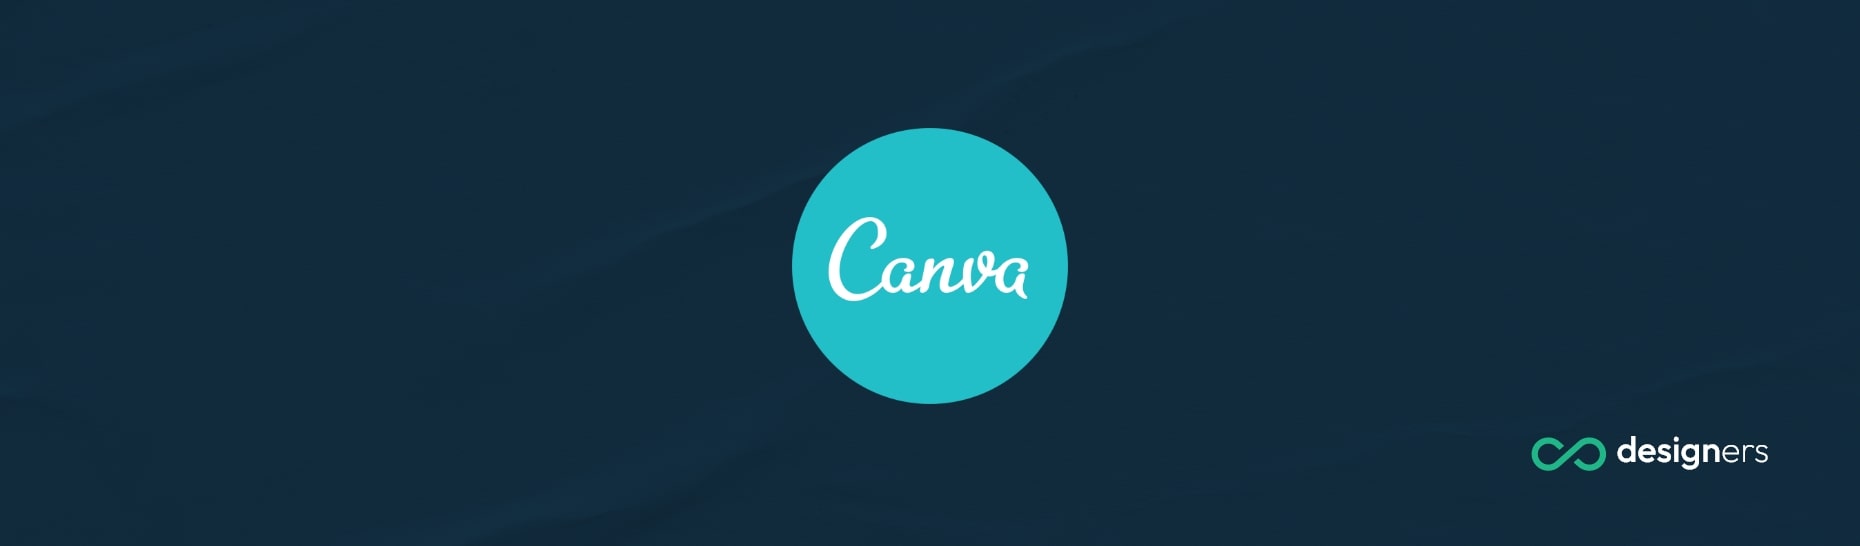 How Do I Change an Image in Canva Template?